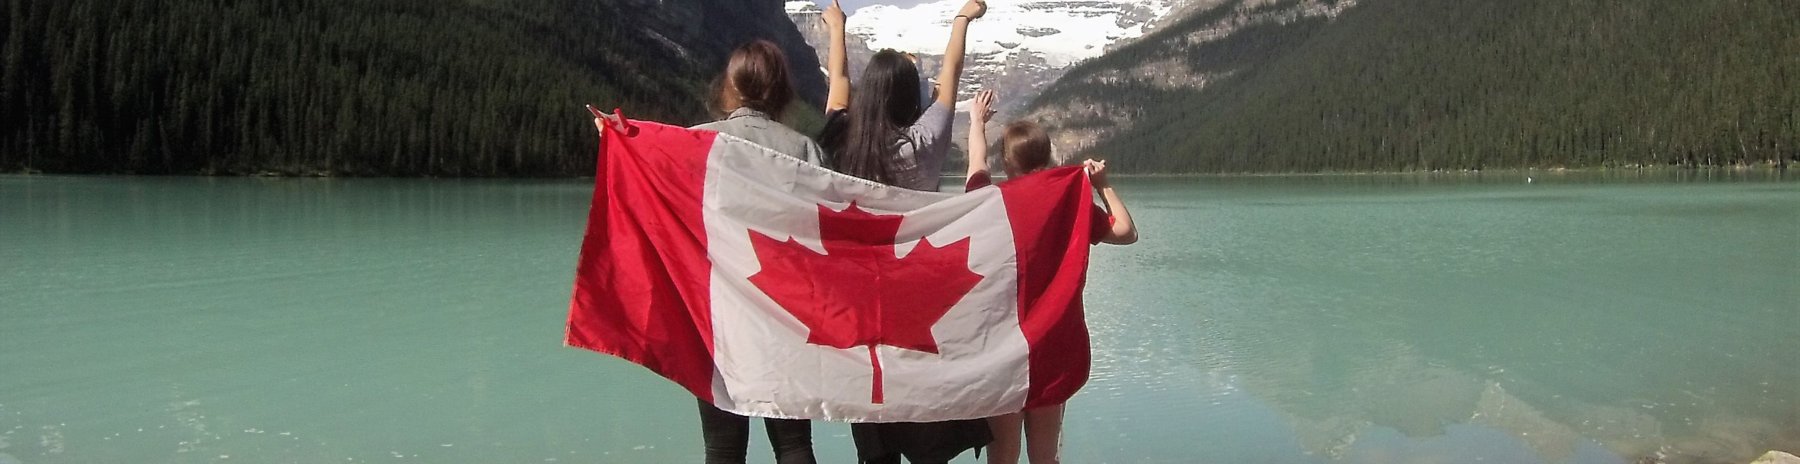 Group of friends holding the Canada / Canadian flag at the edge of a lake with mountains in the distance